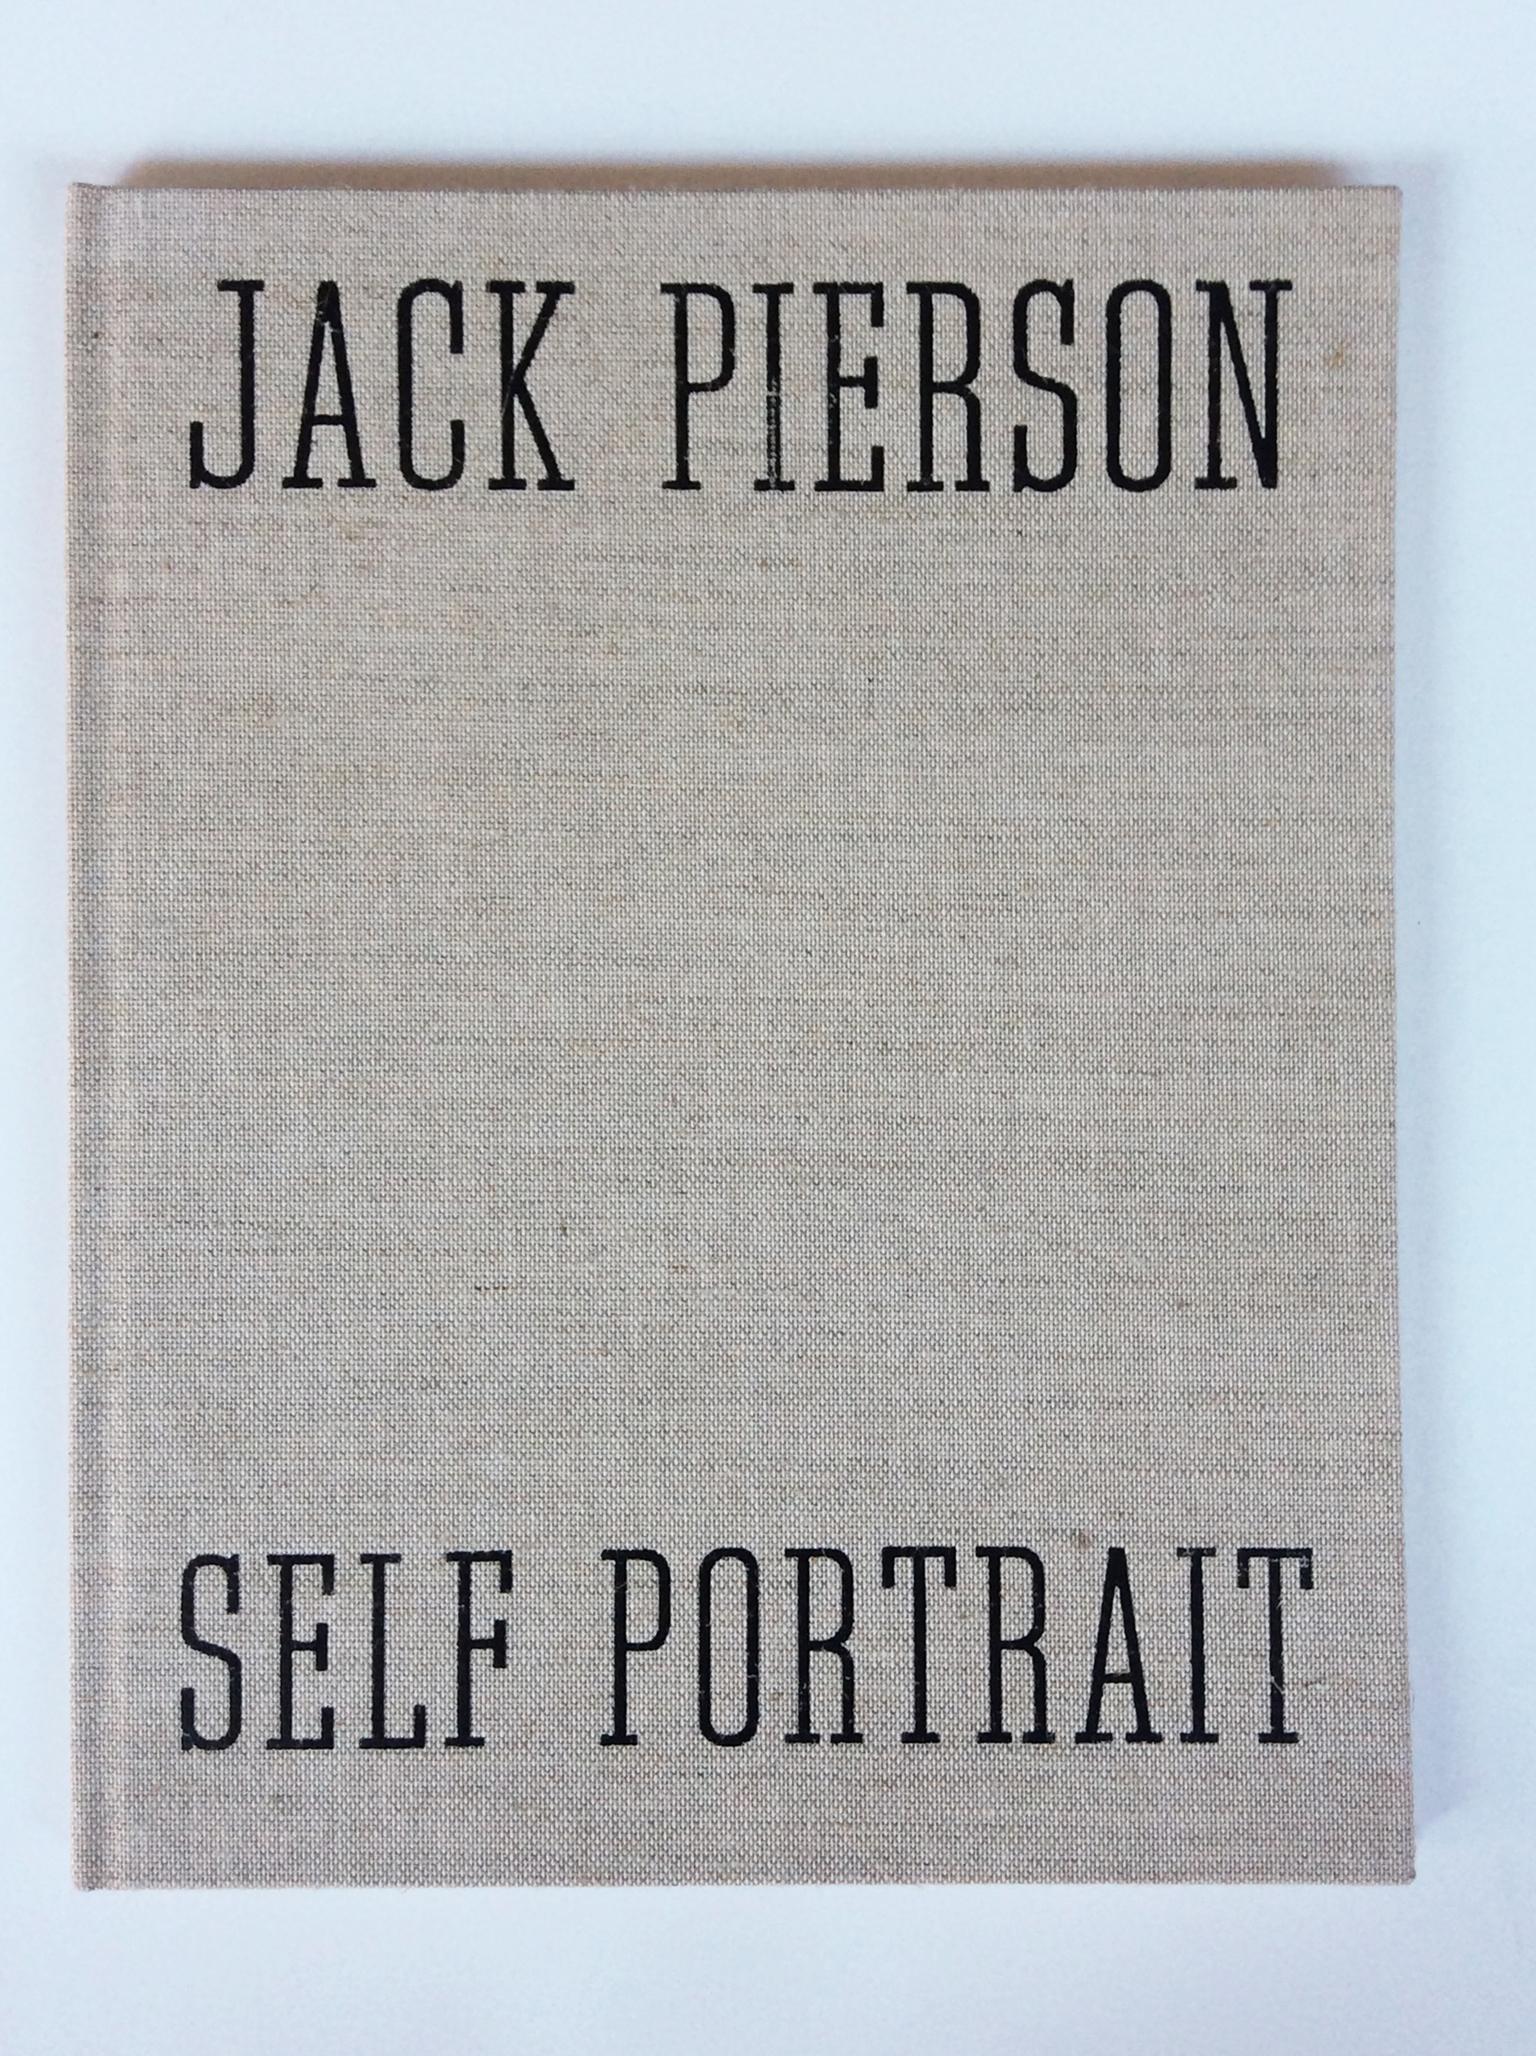 A beautiful monograph of Jack Pierson's photographic series 